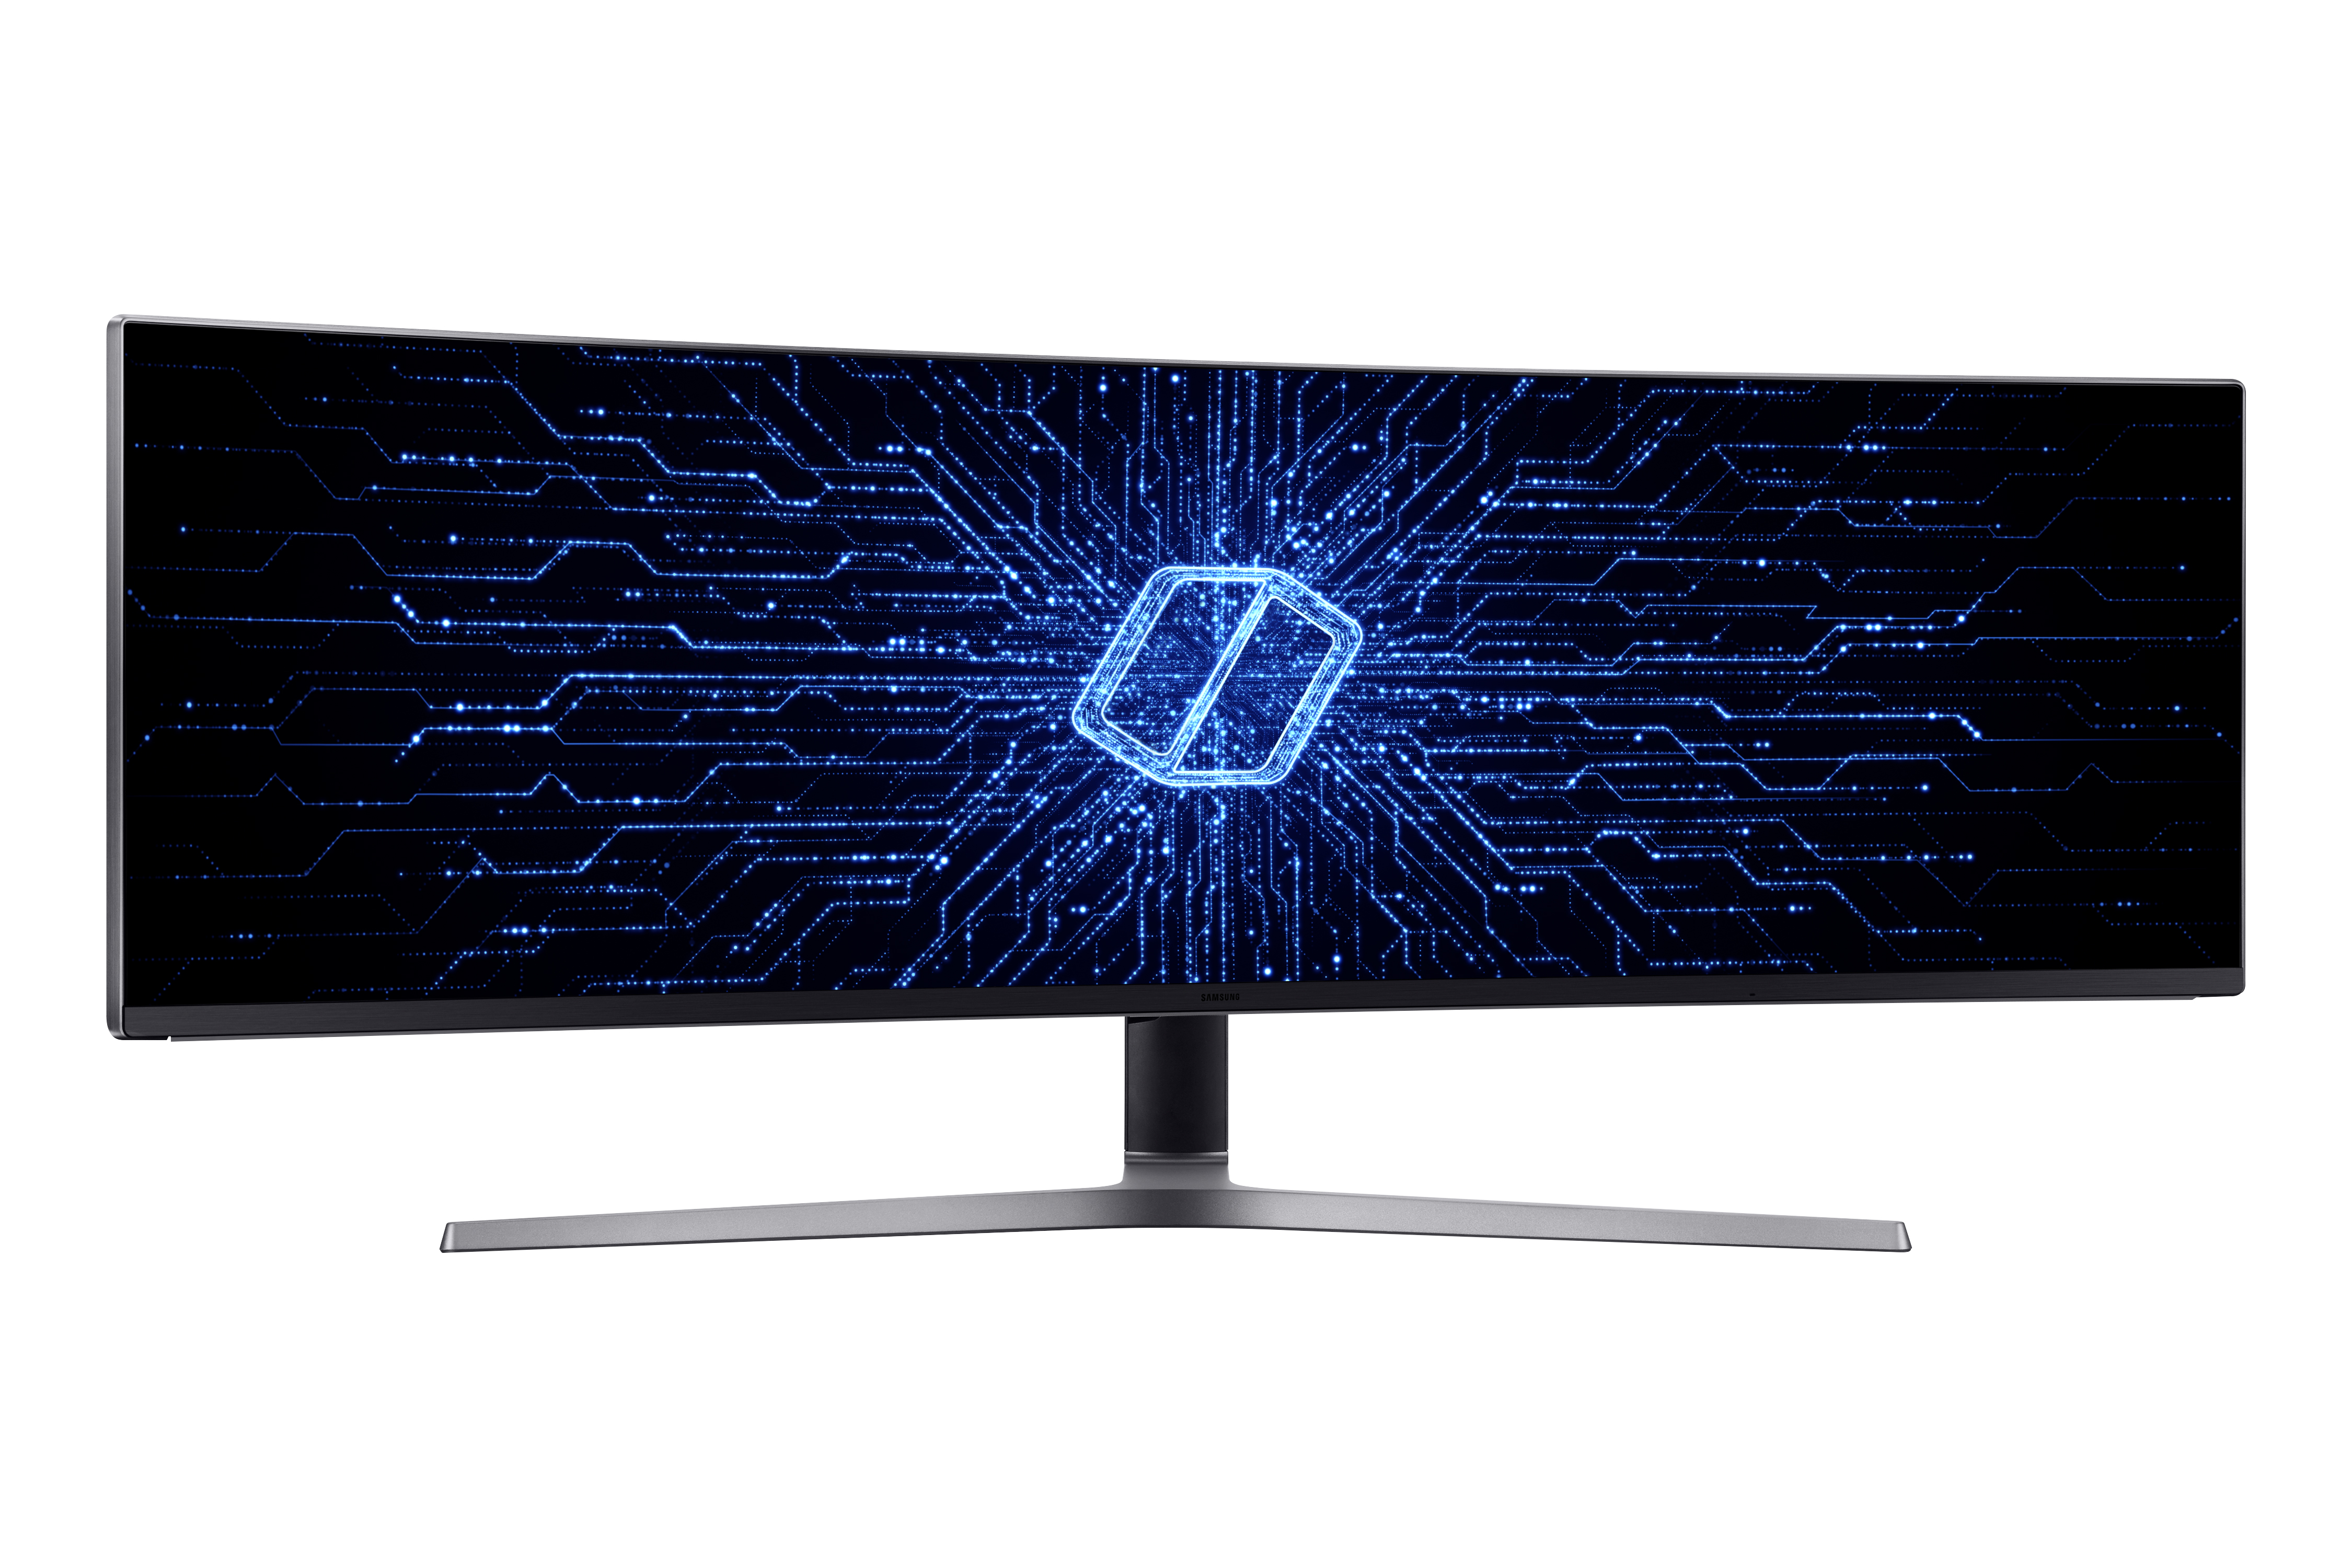 Samsung Odyssey Gaming Monitor | 49" (124cm) | Double FHD | QLED | HDR | C49HG90